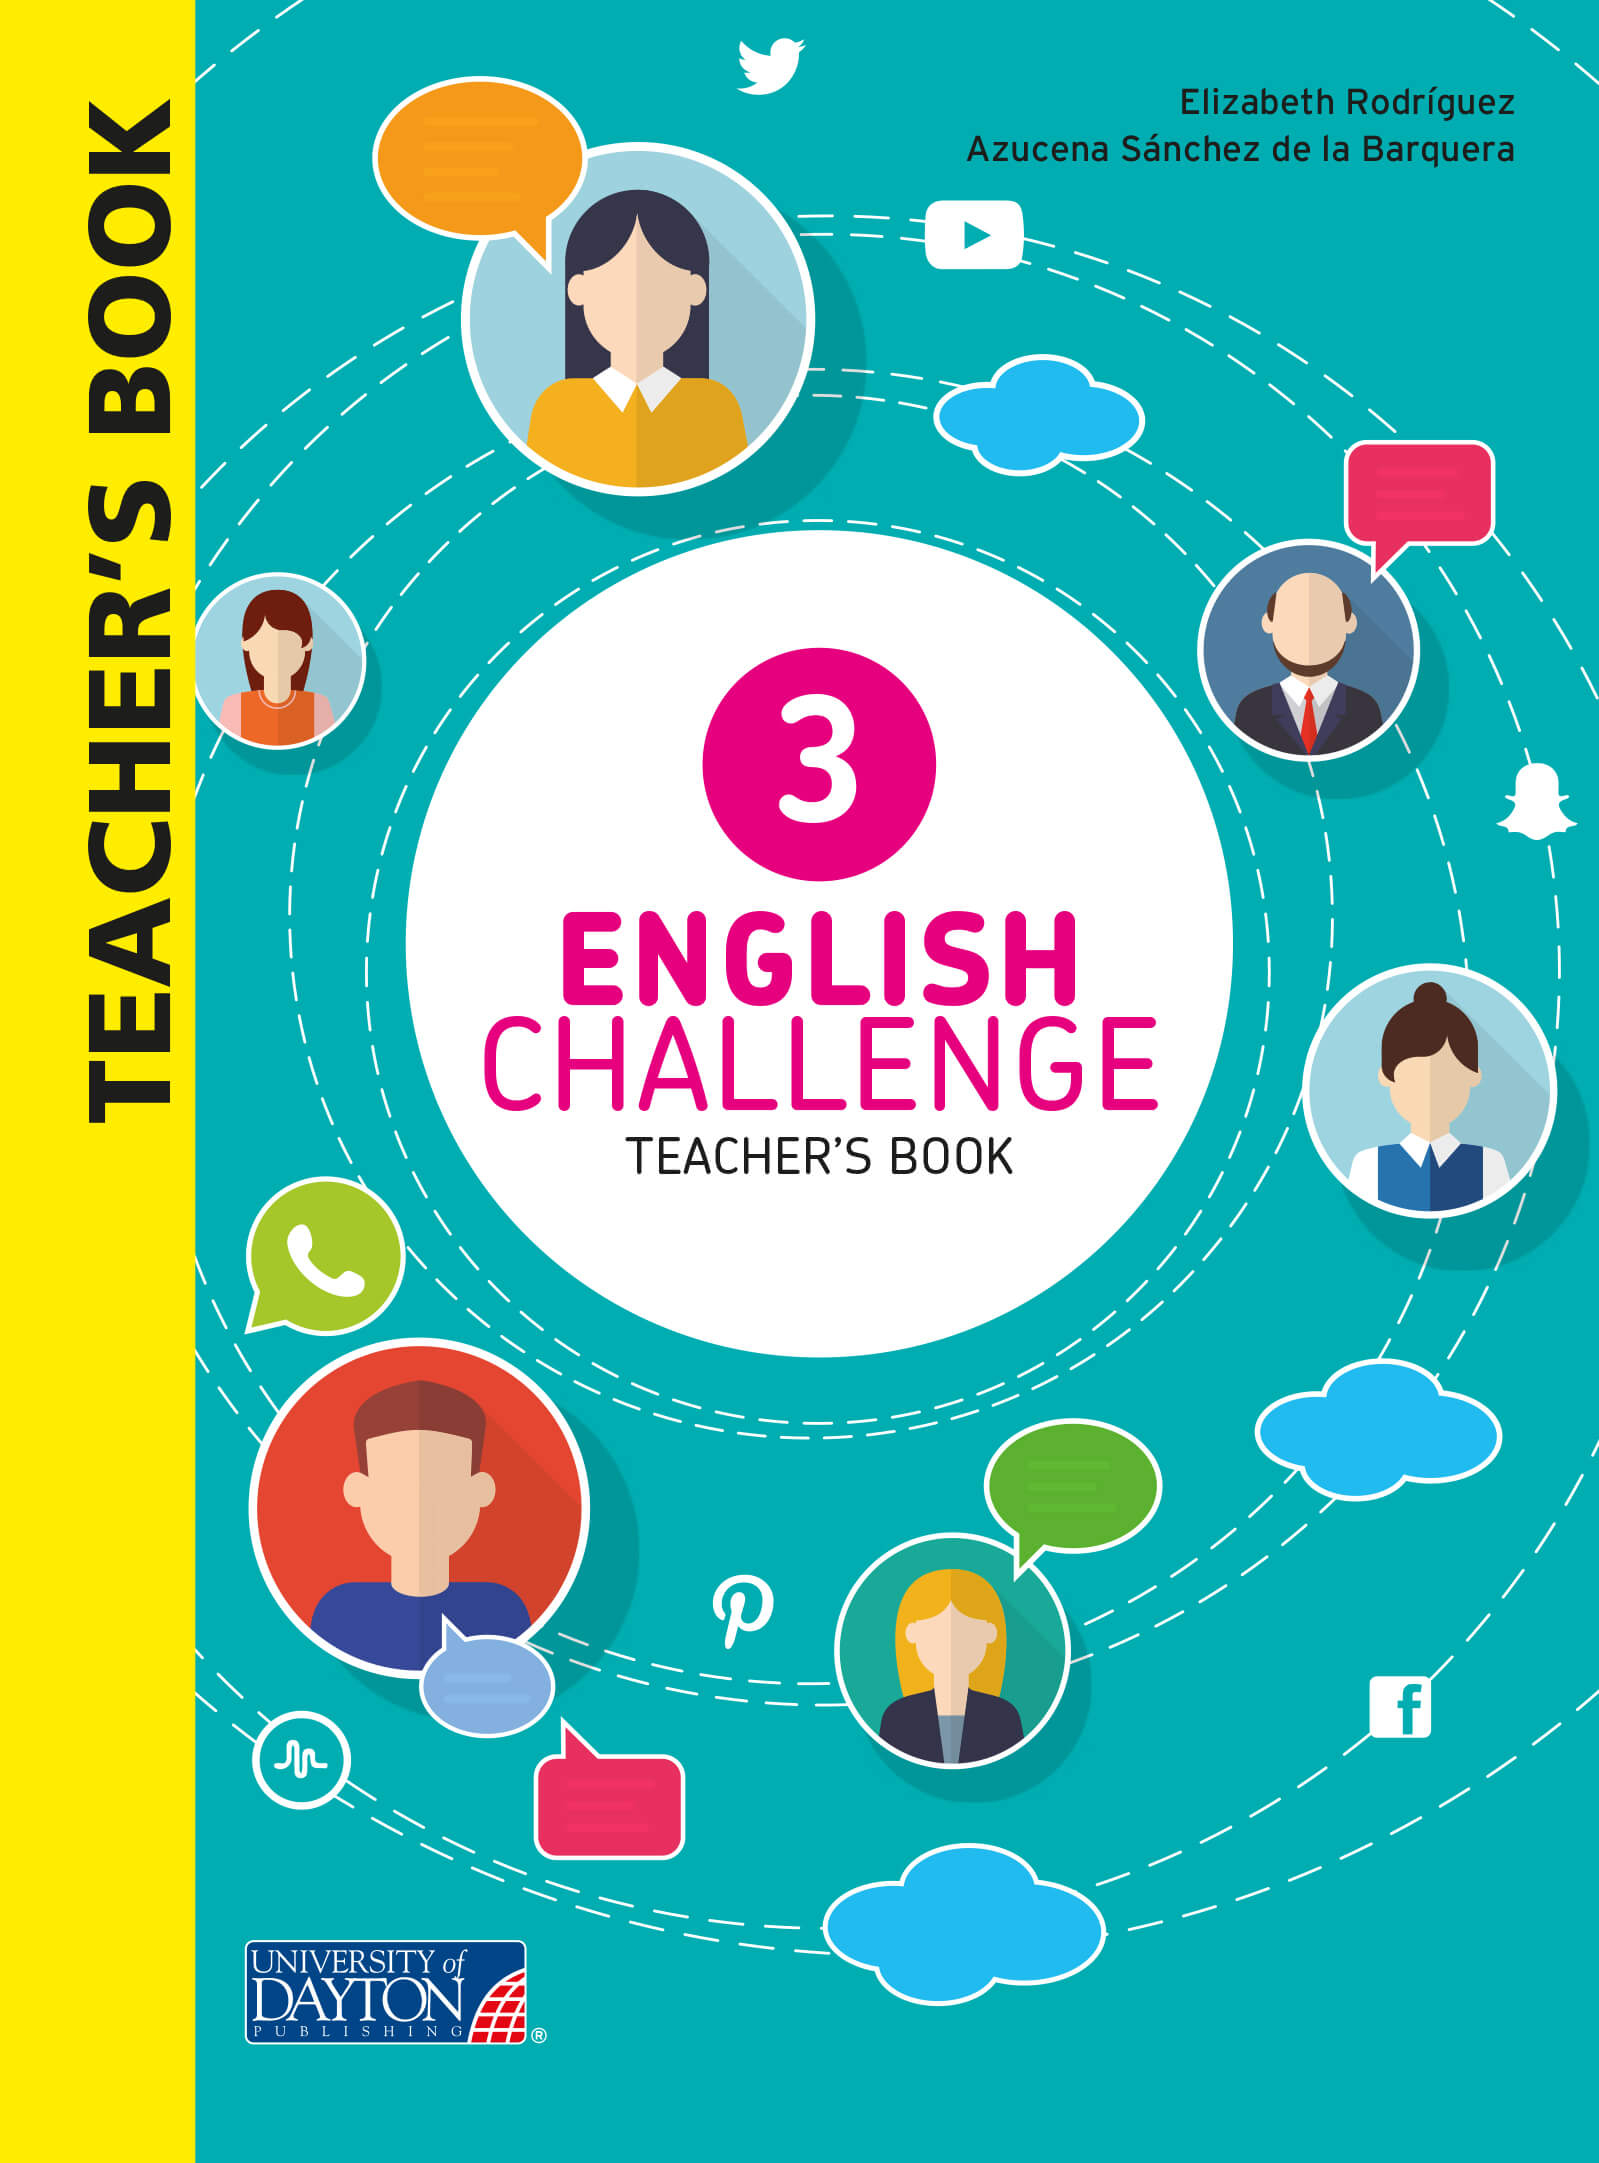 English Challenge 3 : integrated learner's book (Material docente)